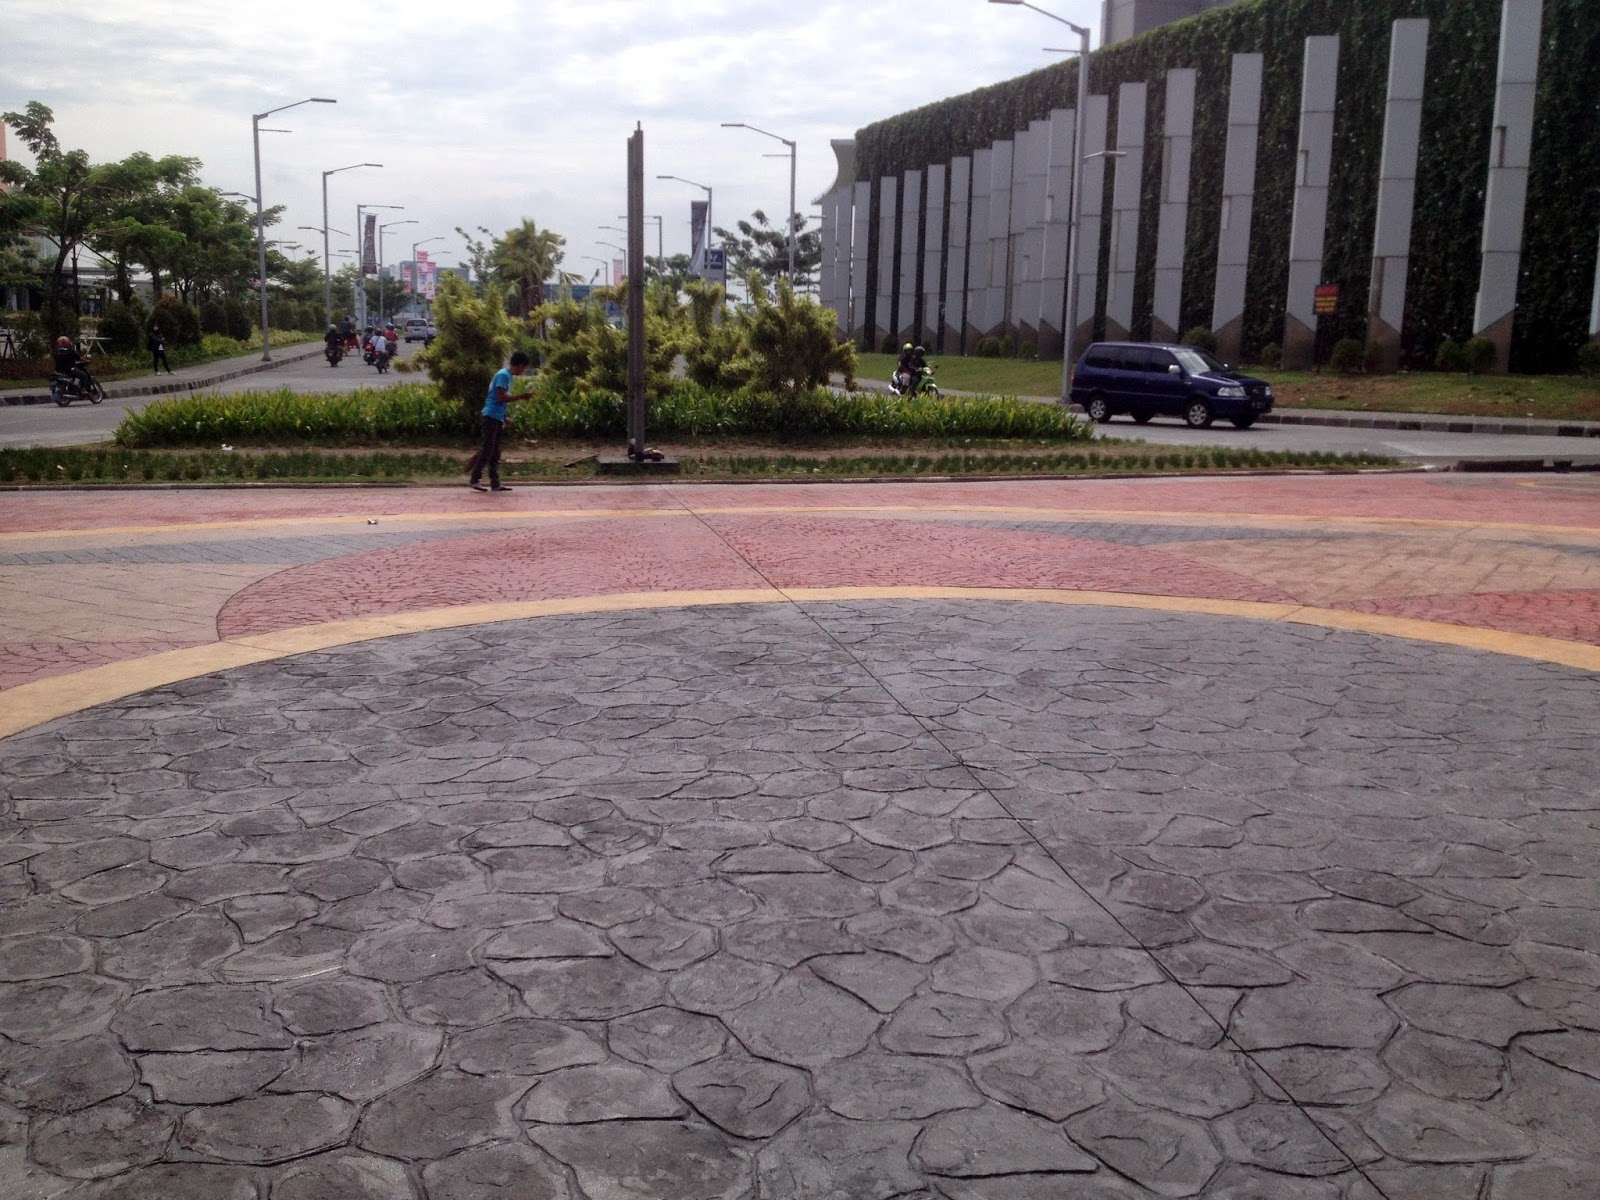 Patterned Concrete Indonesia: 2015-01-18